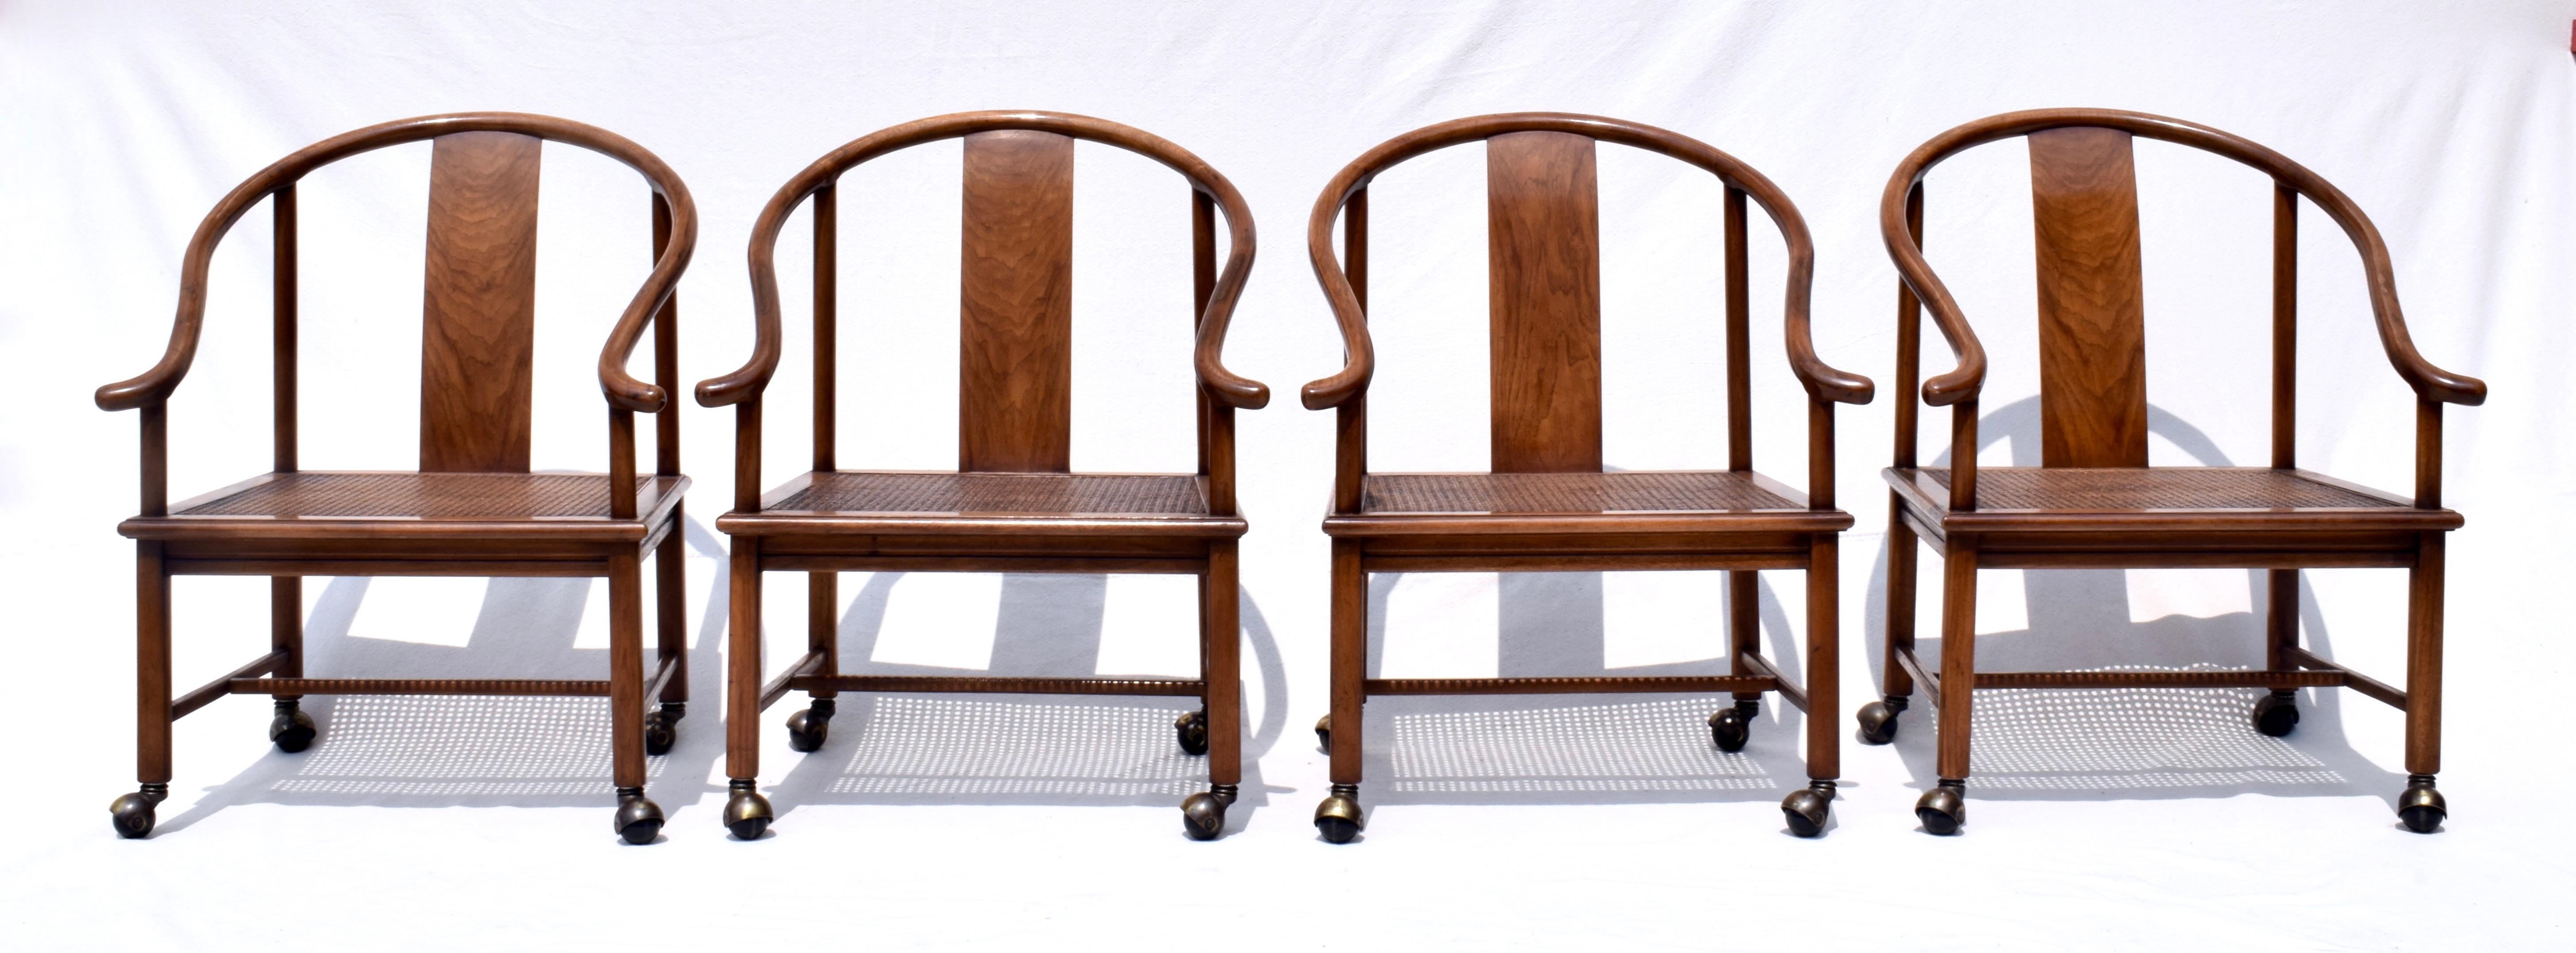 20th c. Modern Ming Horseshoe Chairs With Caned Seats Custom Cushions  For Sale 4